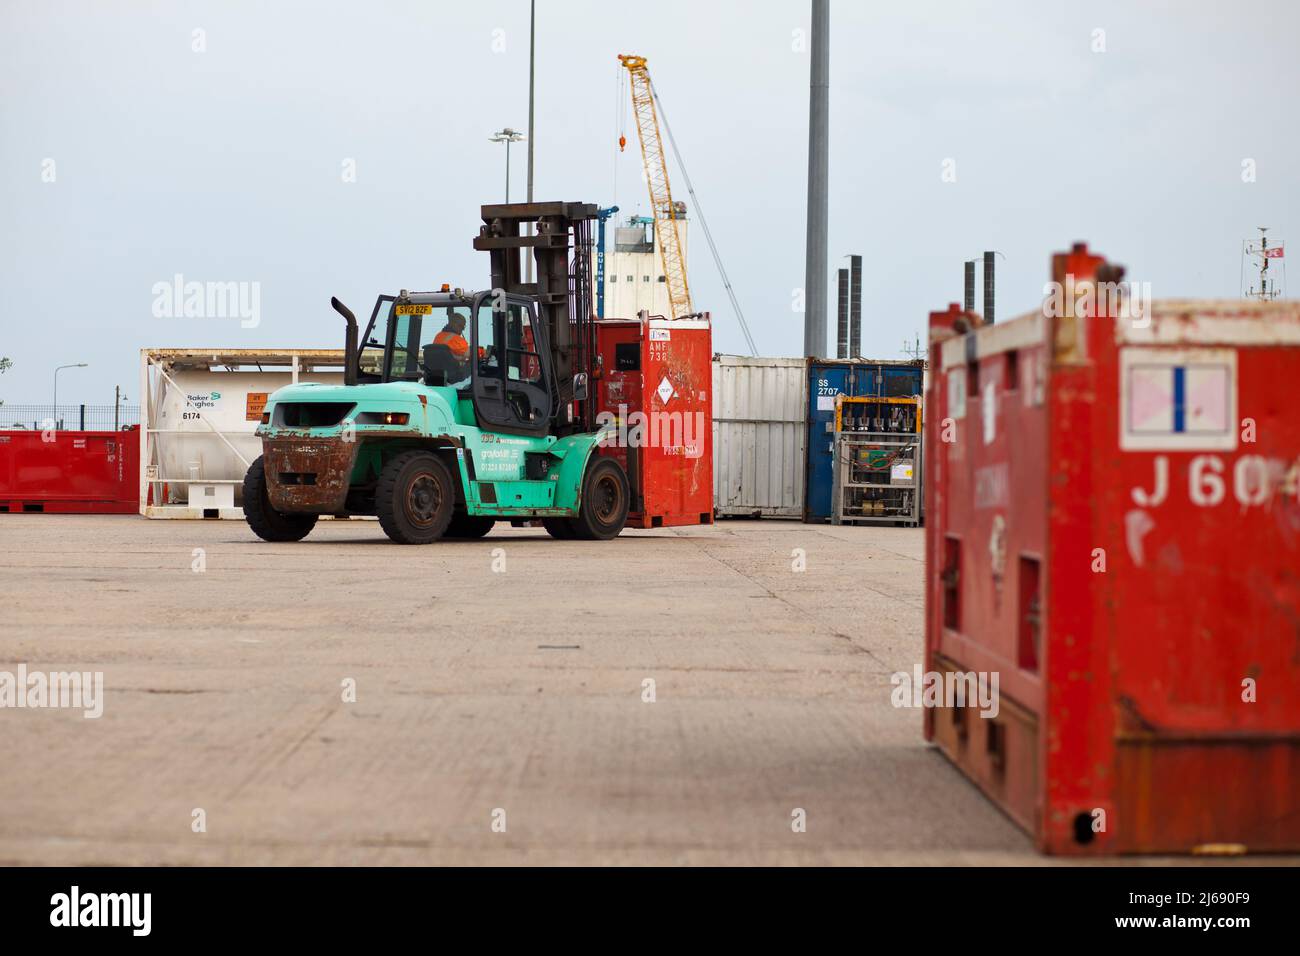 Loading and unloading of North Sea shipping containers using 5 and 10 tonne Mitsubishi forklifts on Peterson's quay at Lowestoft. Stock Photo